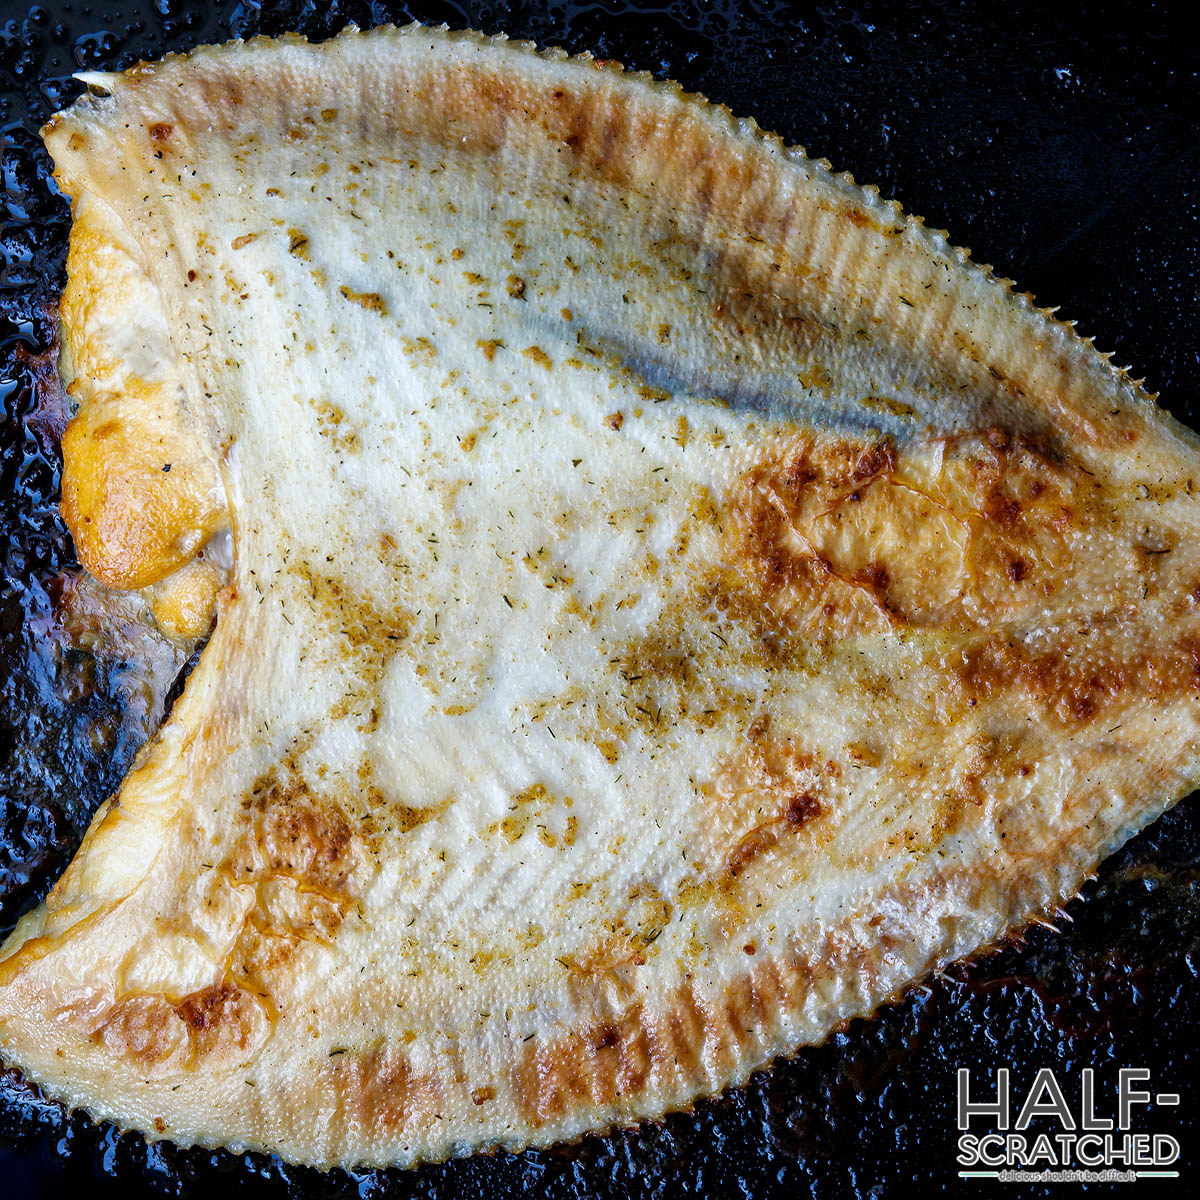 Baked flounder filet on a baking tray